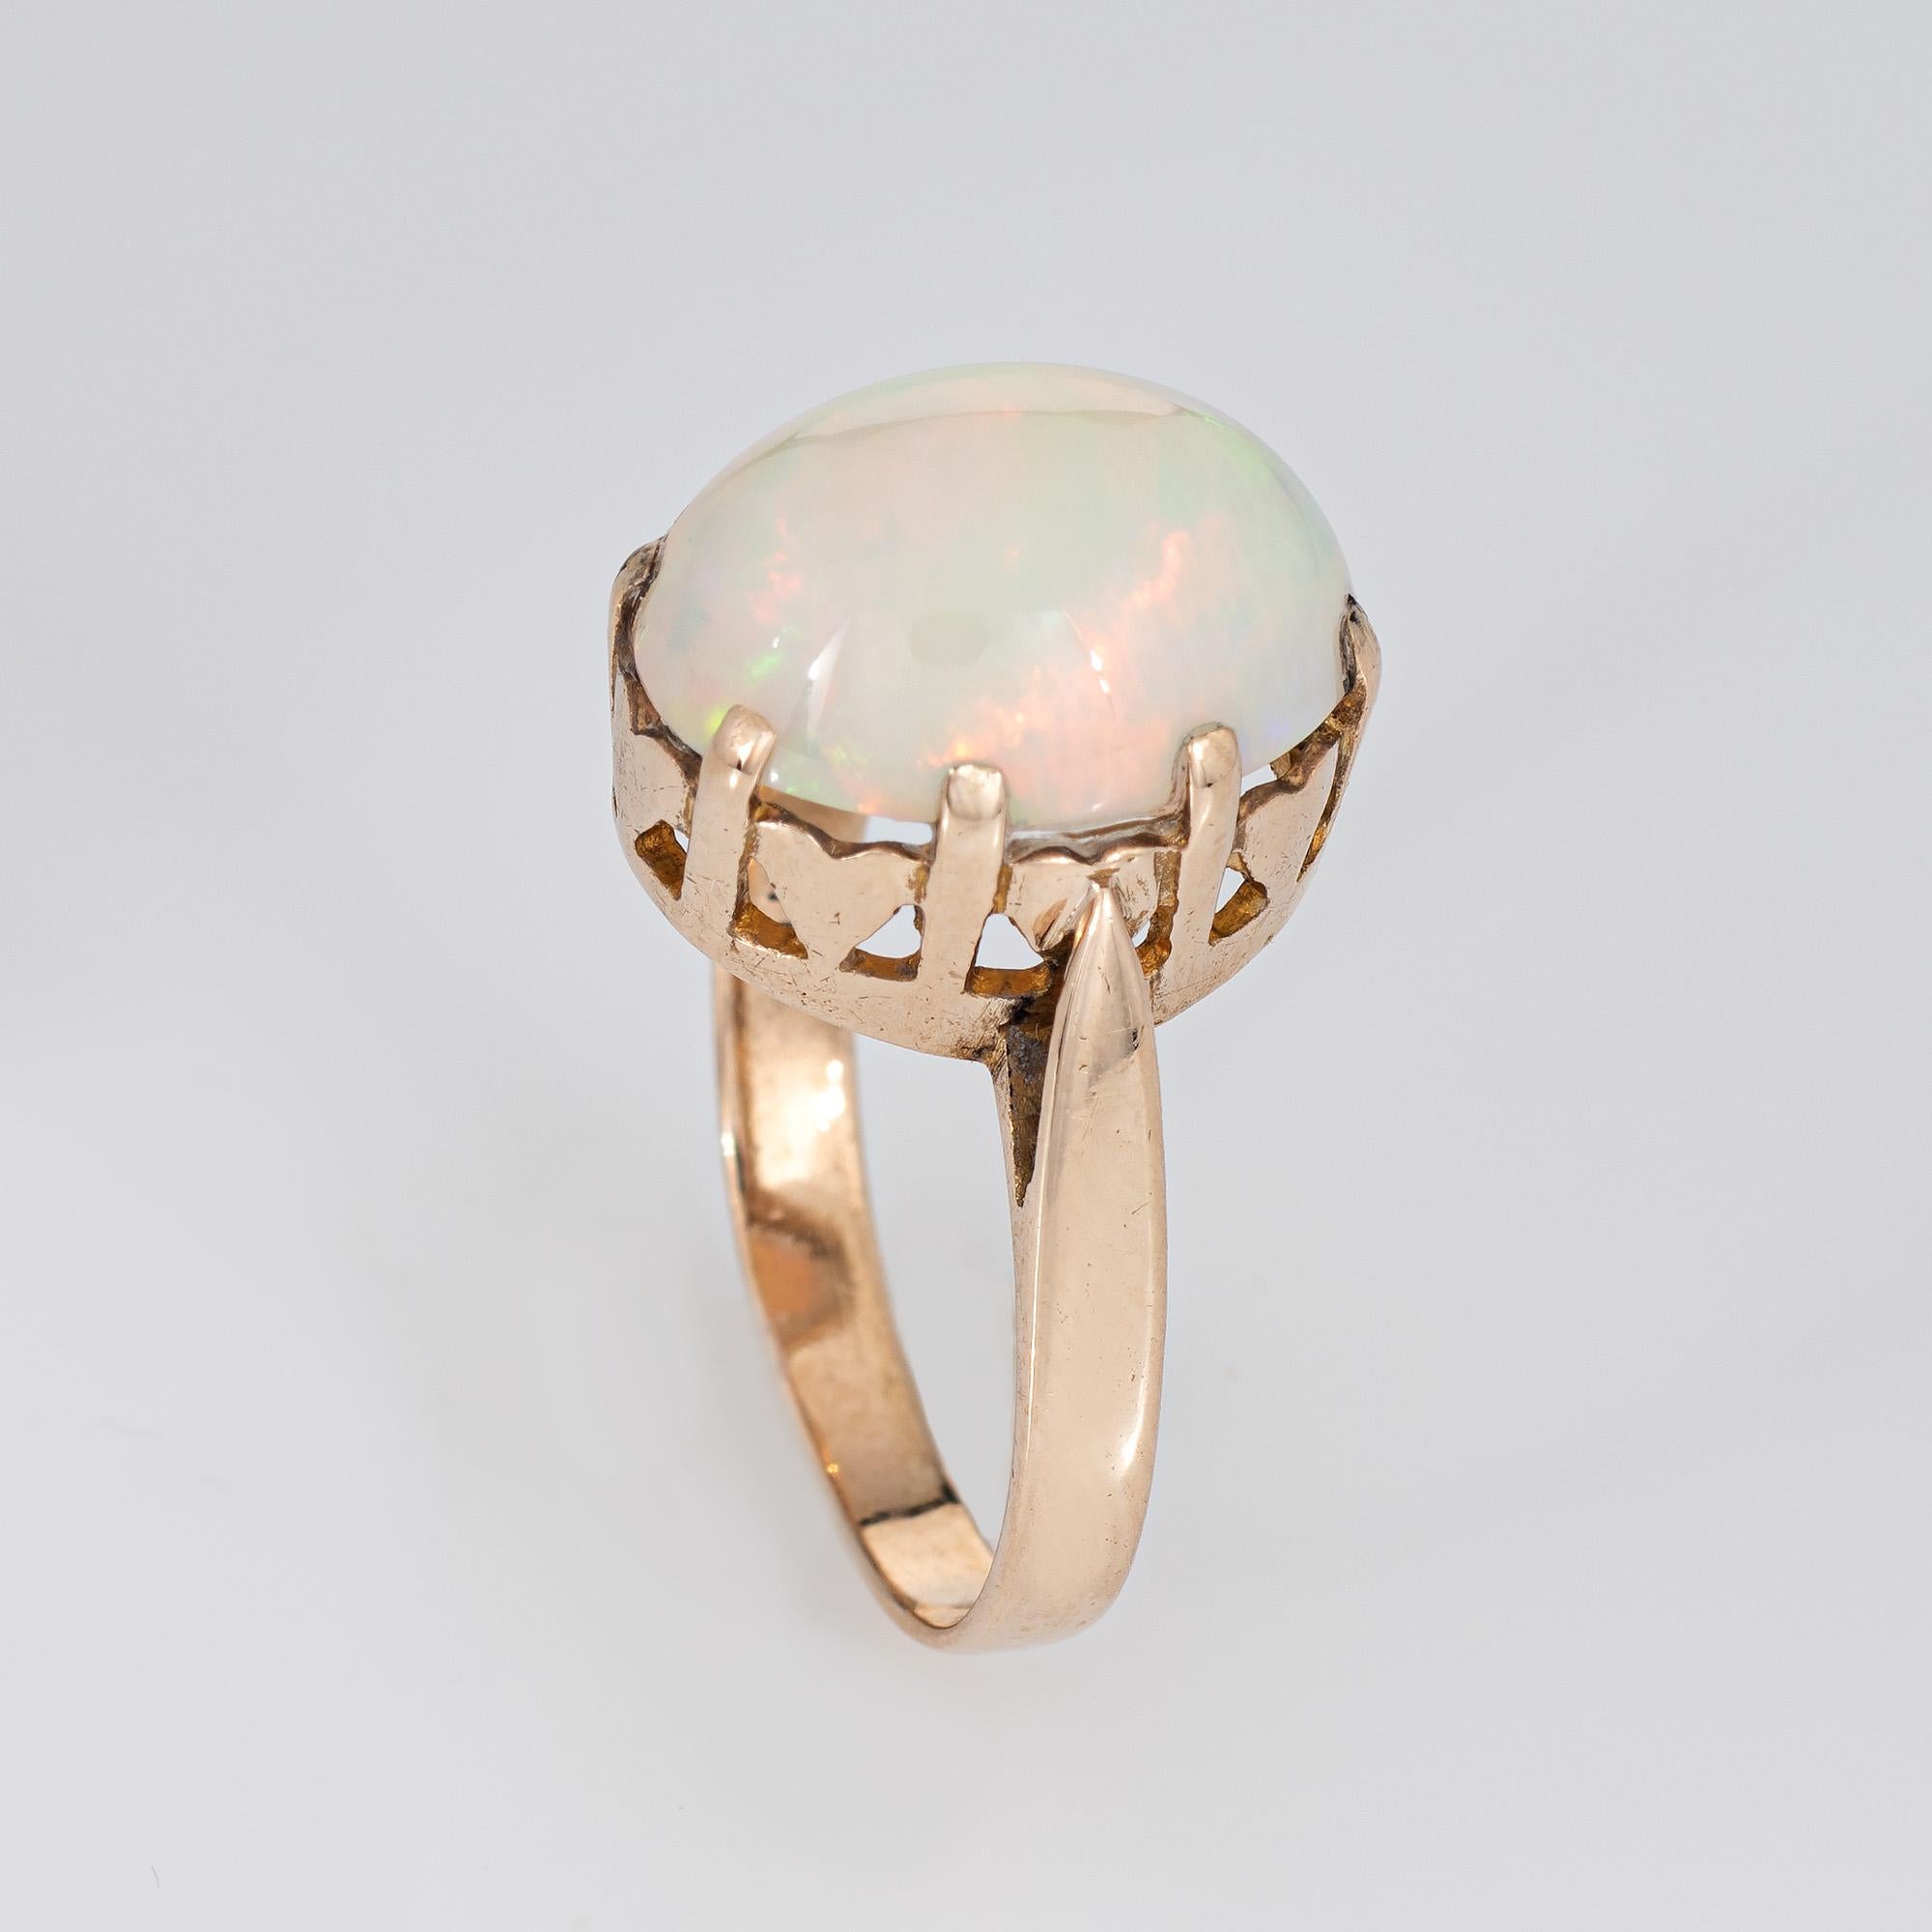 Stylish natural Ethiopian opal cocktail ring crafted in 14k yellow gold (circa 1960s)

Natural opal measures 13mm x 10mm (estimated at 5.65 carats). The opal is in very good condition and free of cracks or chips. The opal is a later addition to the